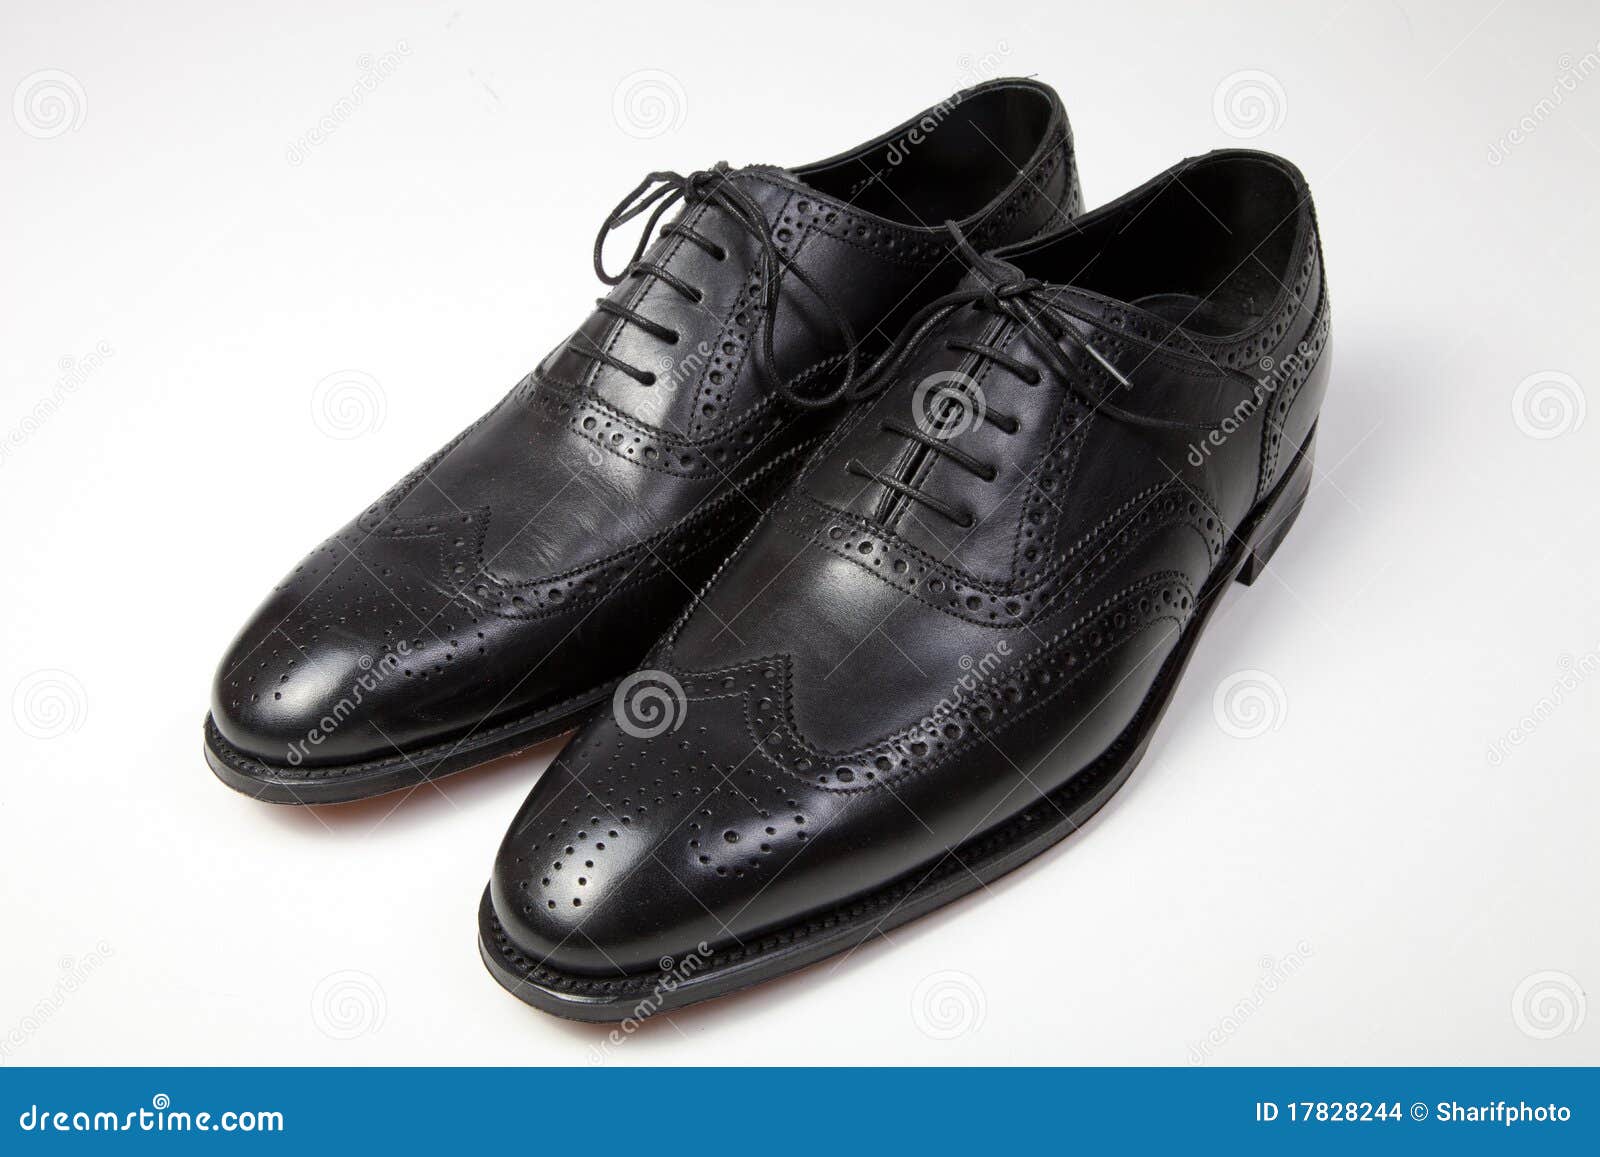 Classic men s shoes stock photo. Image of personal, classic - 17828244